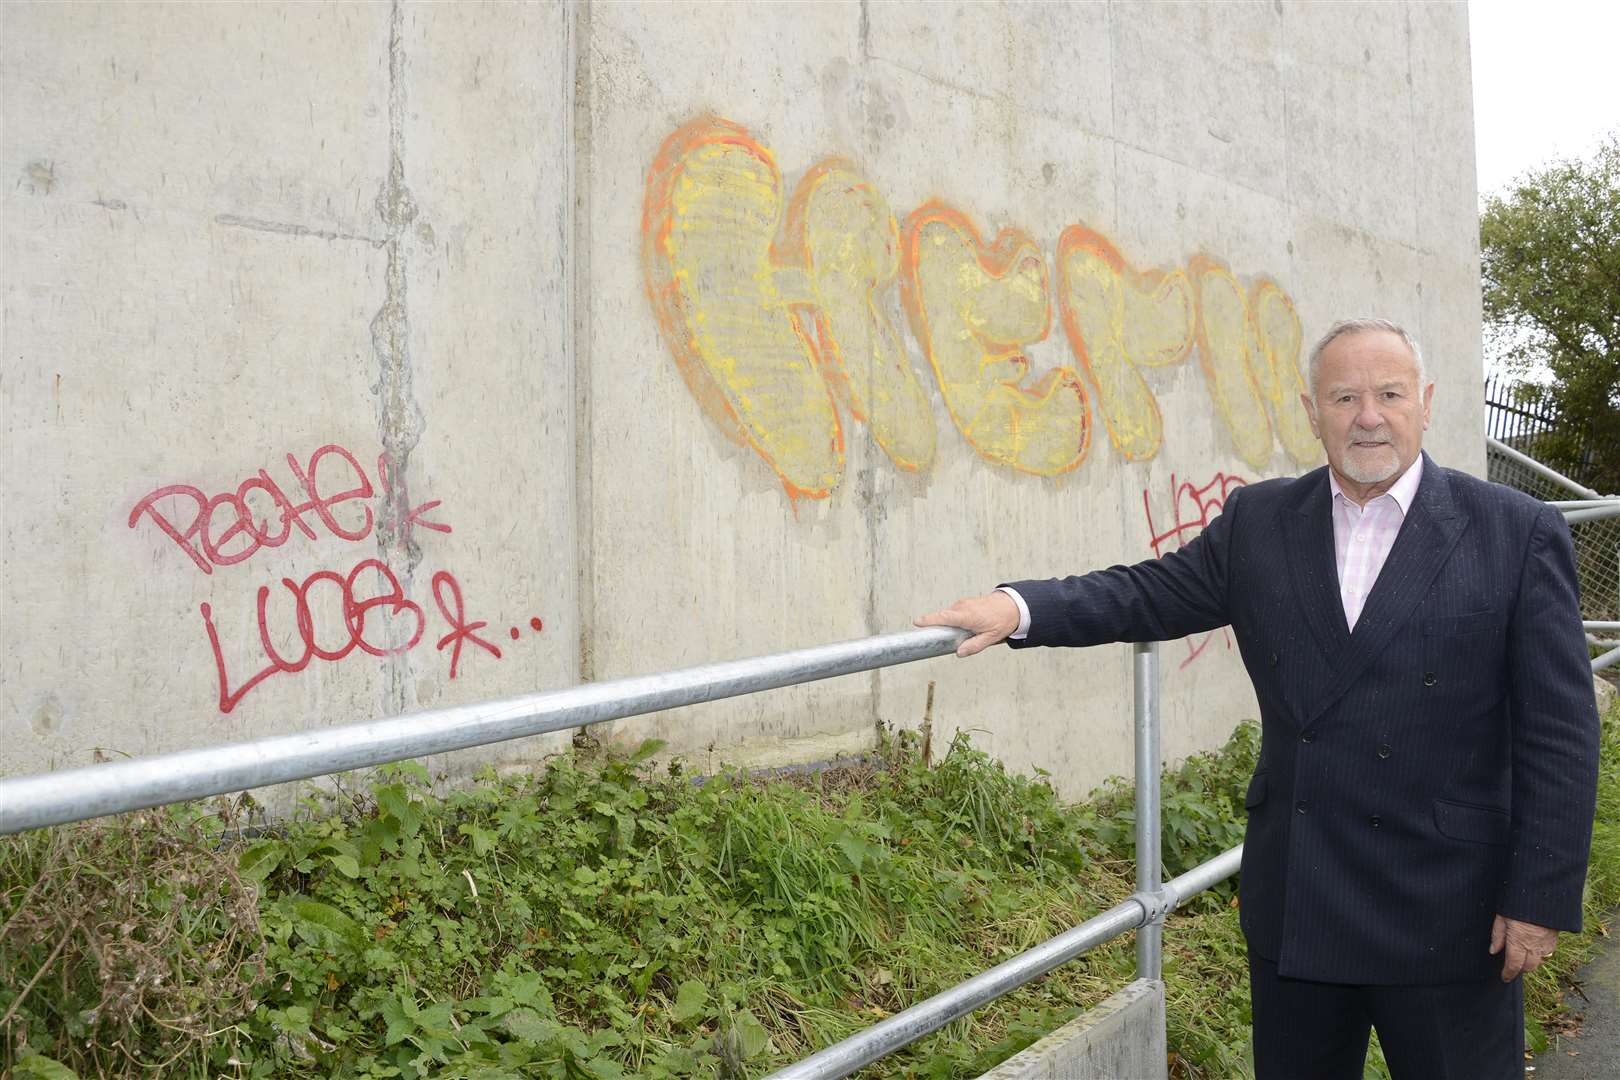 Developer George Wilson with some of the Graffiti